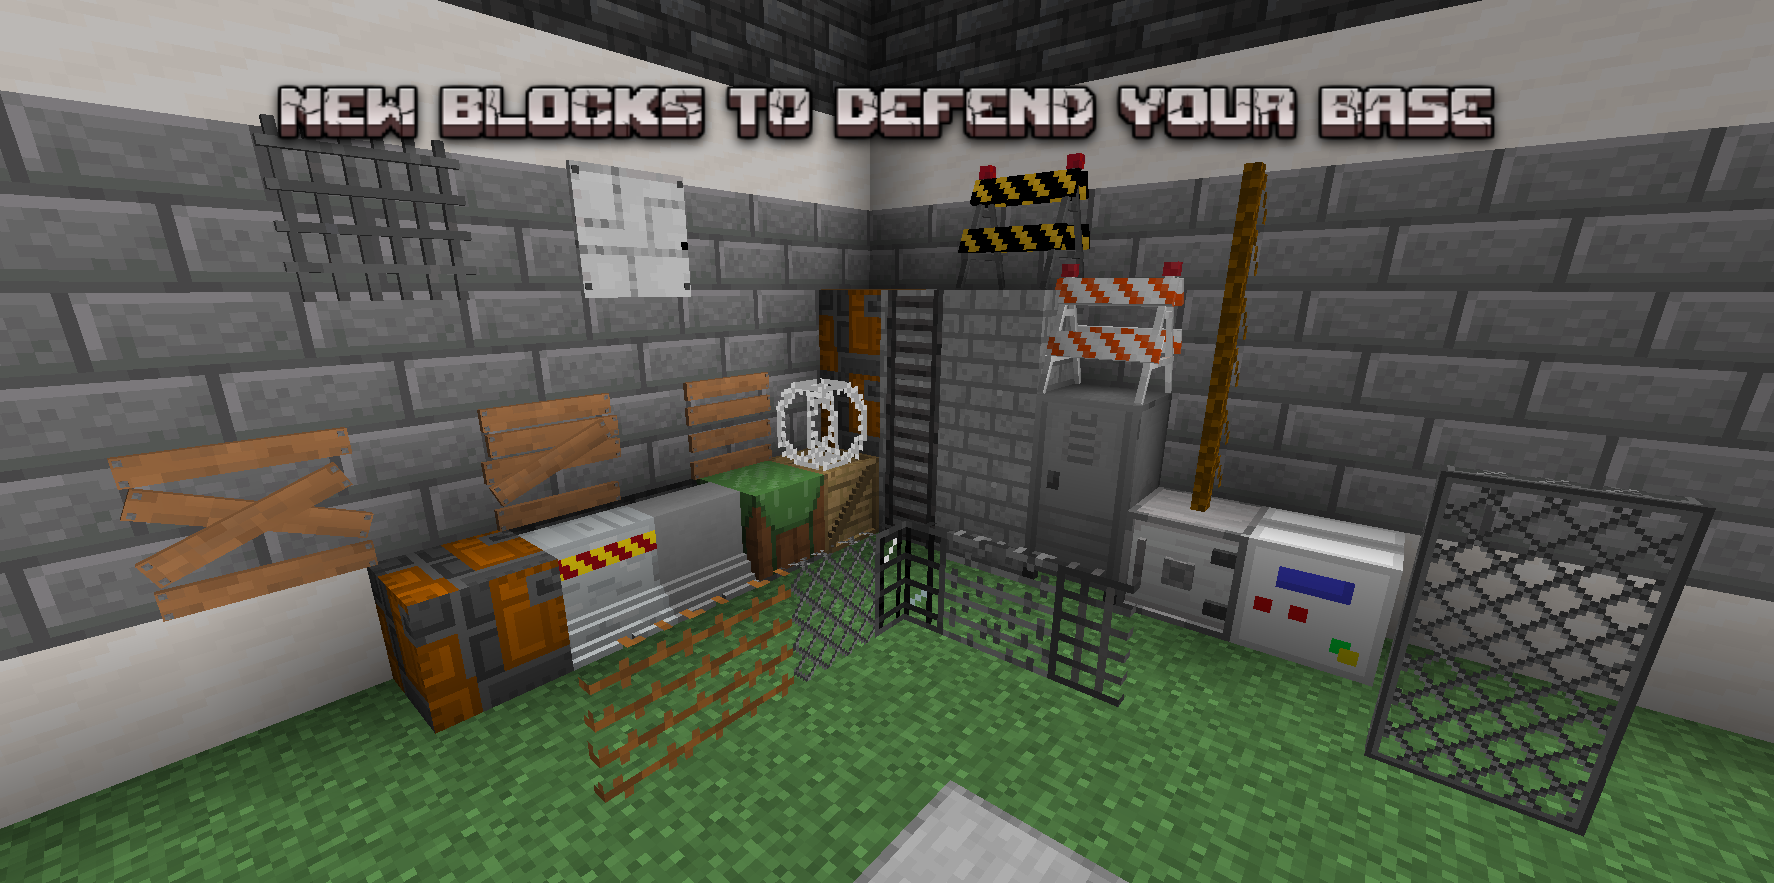 New blocks to defend your base